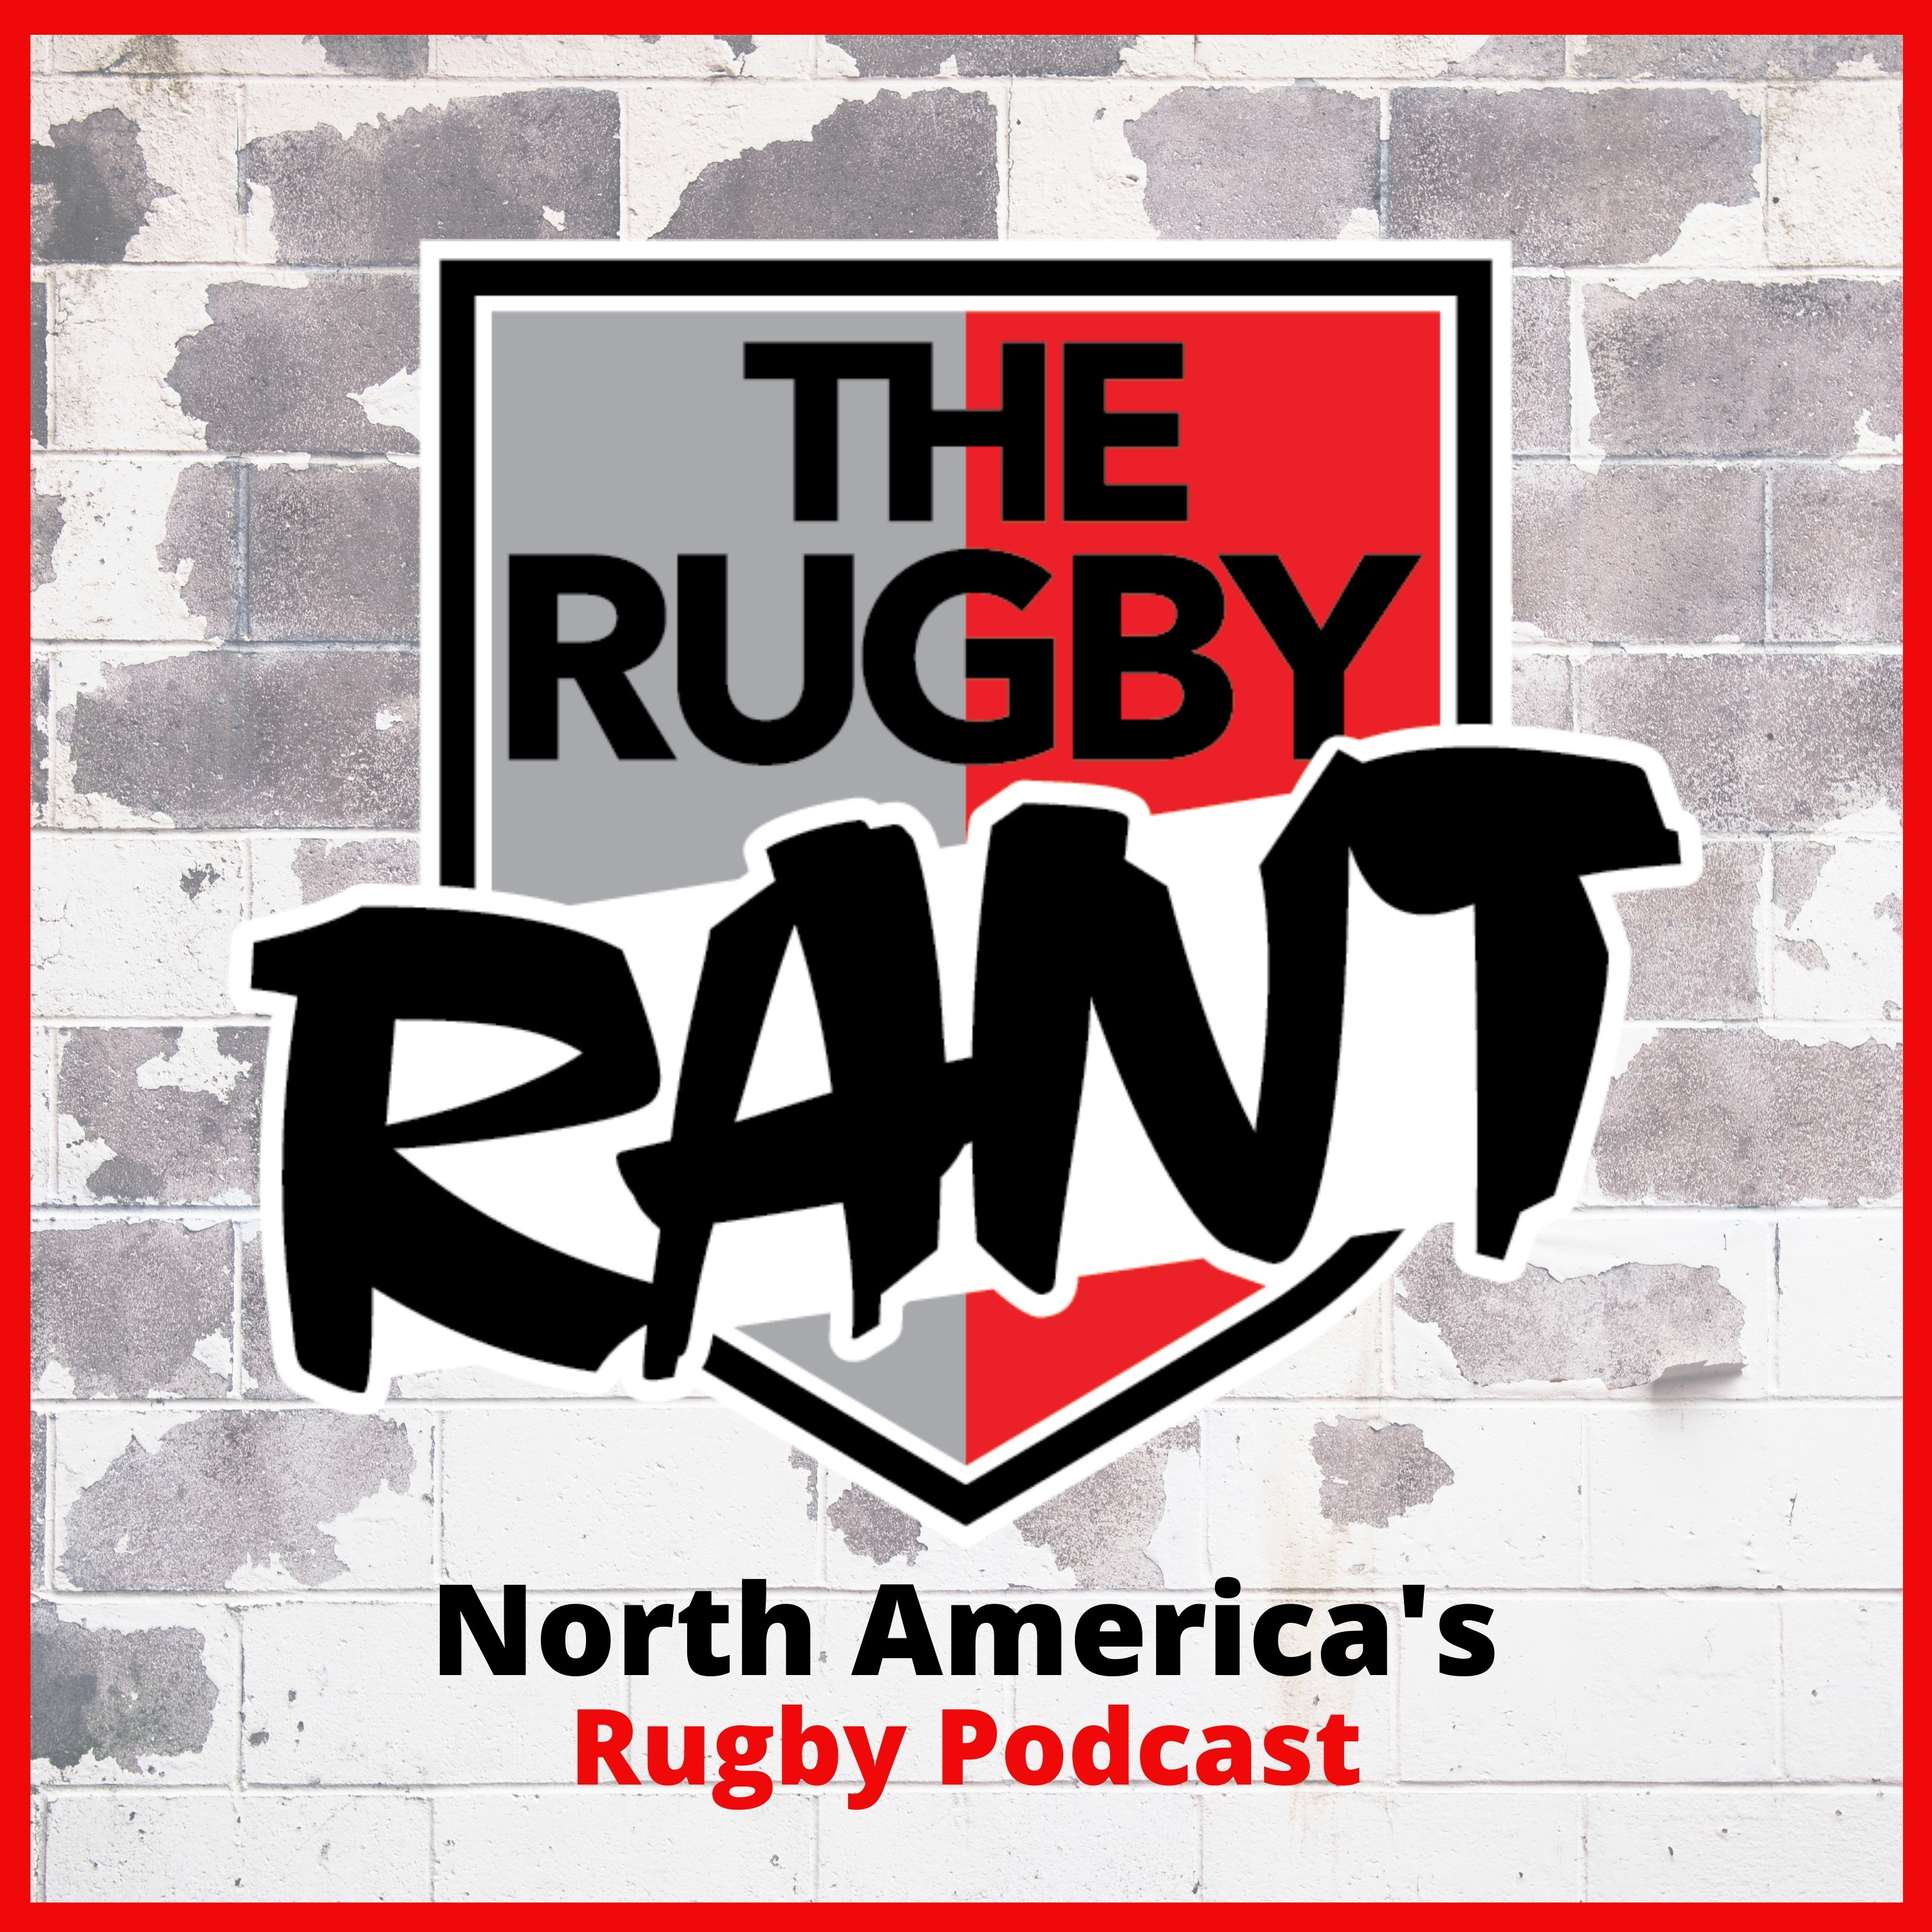 The Rugby Rant - Run, Pass or Kick with Callum Gibbins